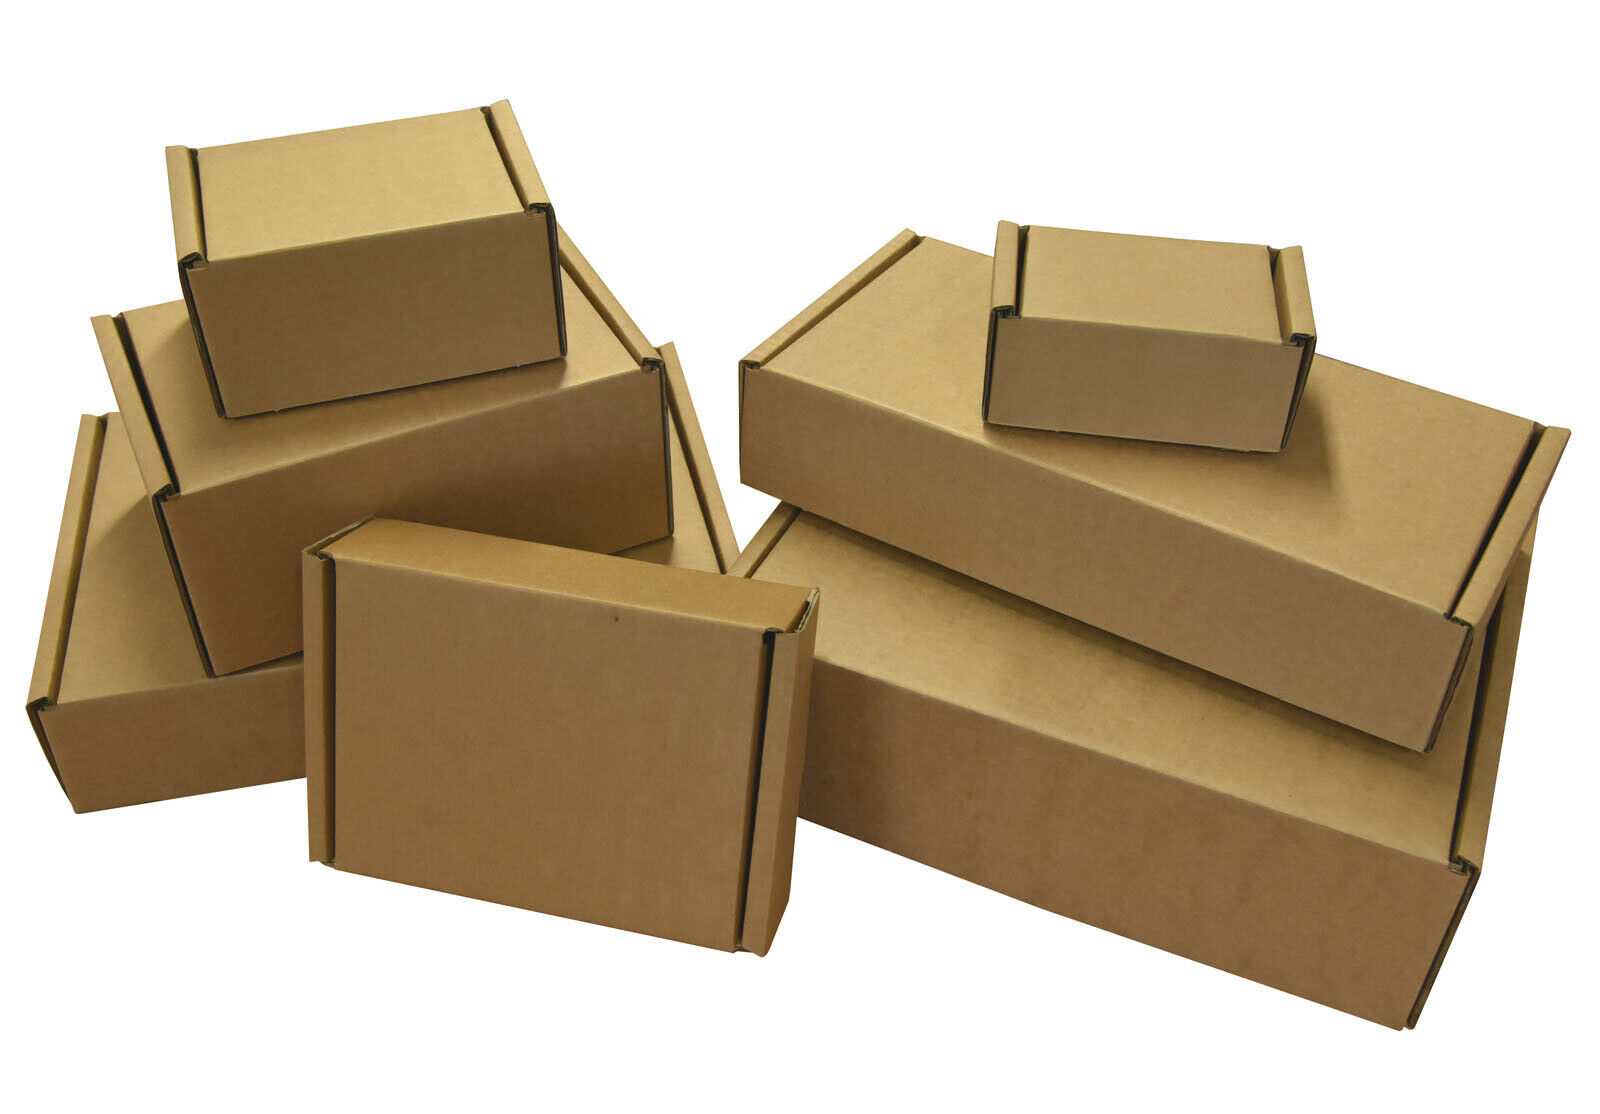 Euapko 5x5x5 Cardboard Box Mailers 25 Pack Brown Cube Corrugated Small Shipping Boxes for Mailing 